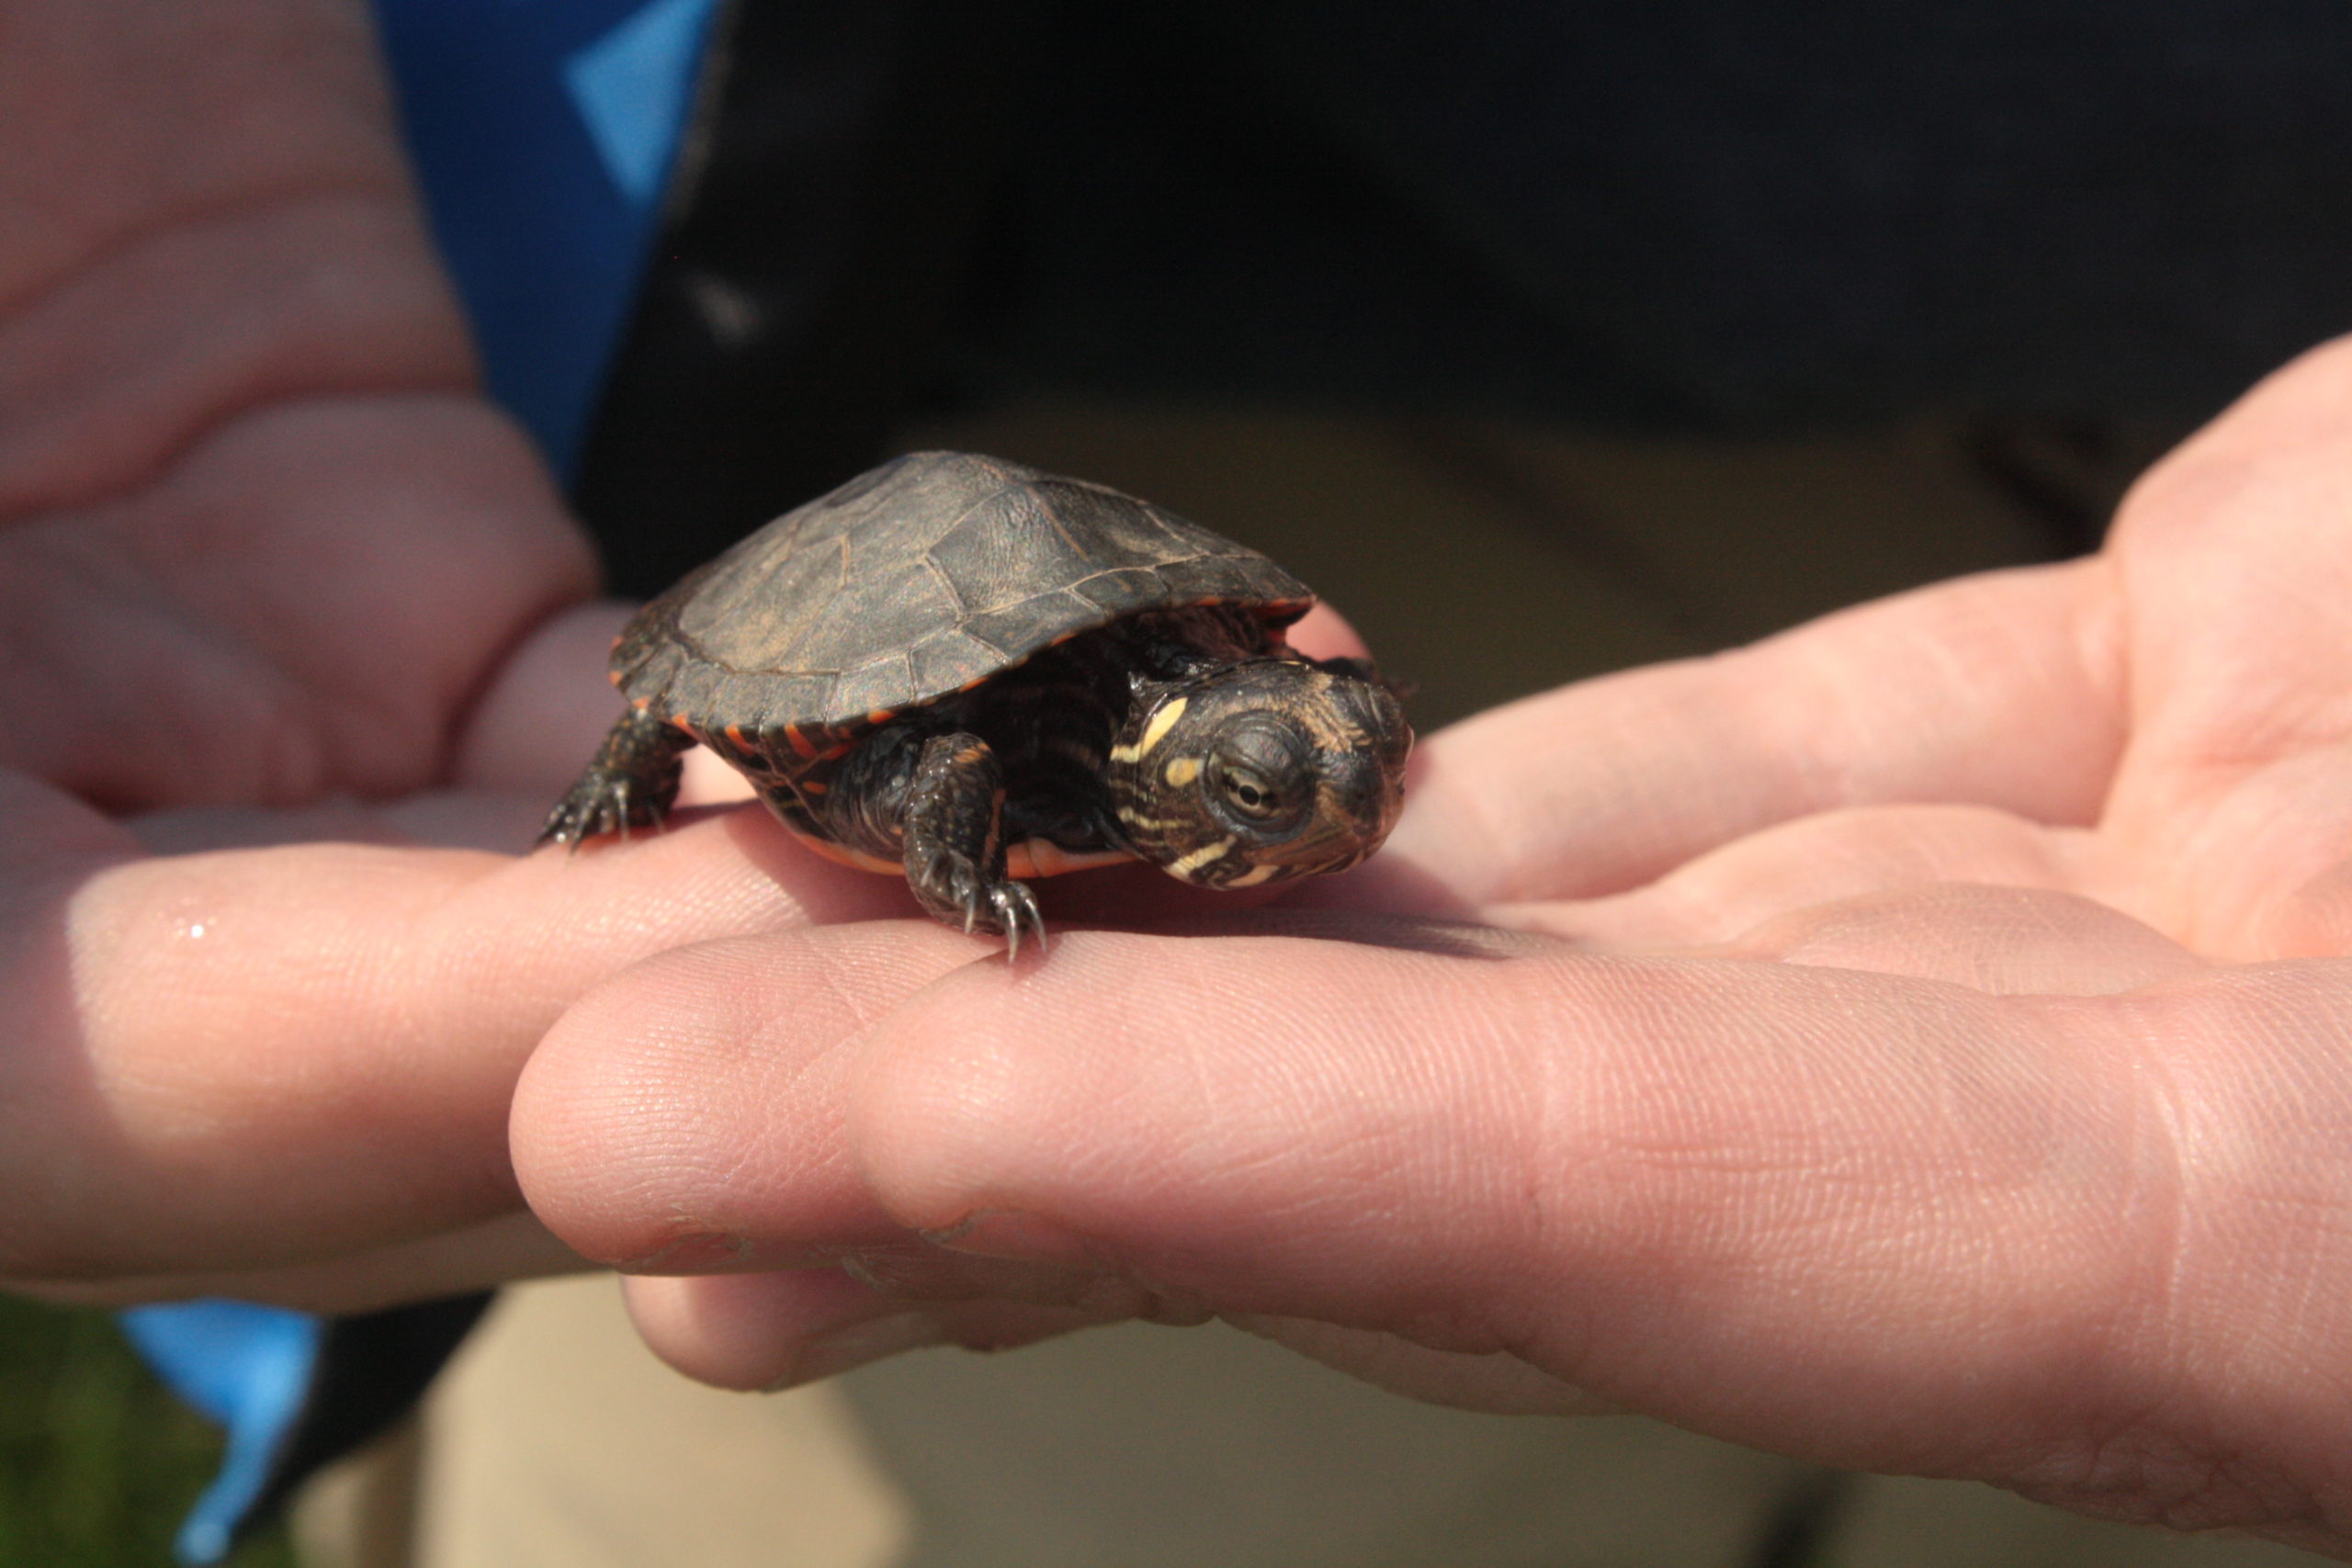 An individual holding a baby turtle in their hand